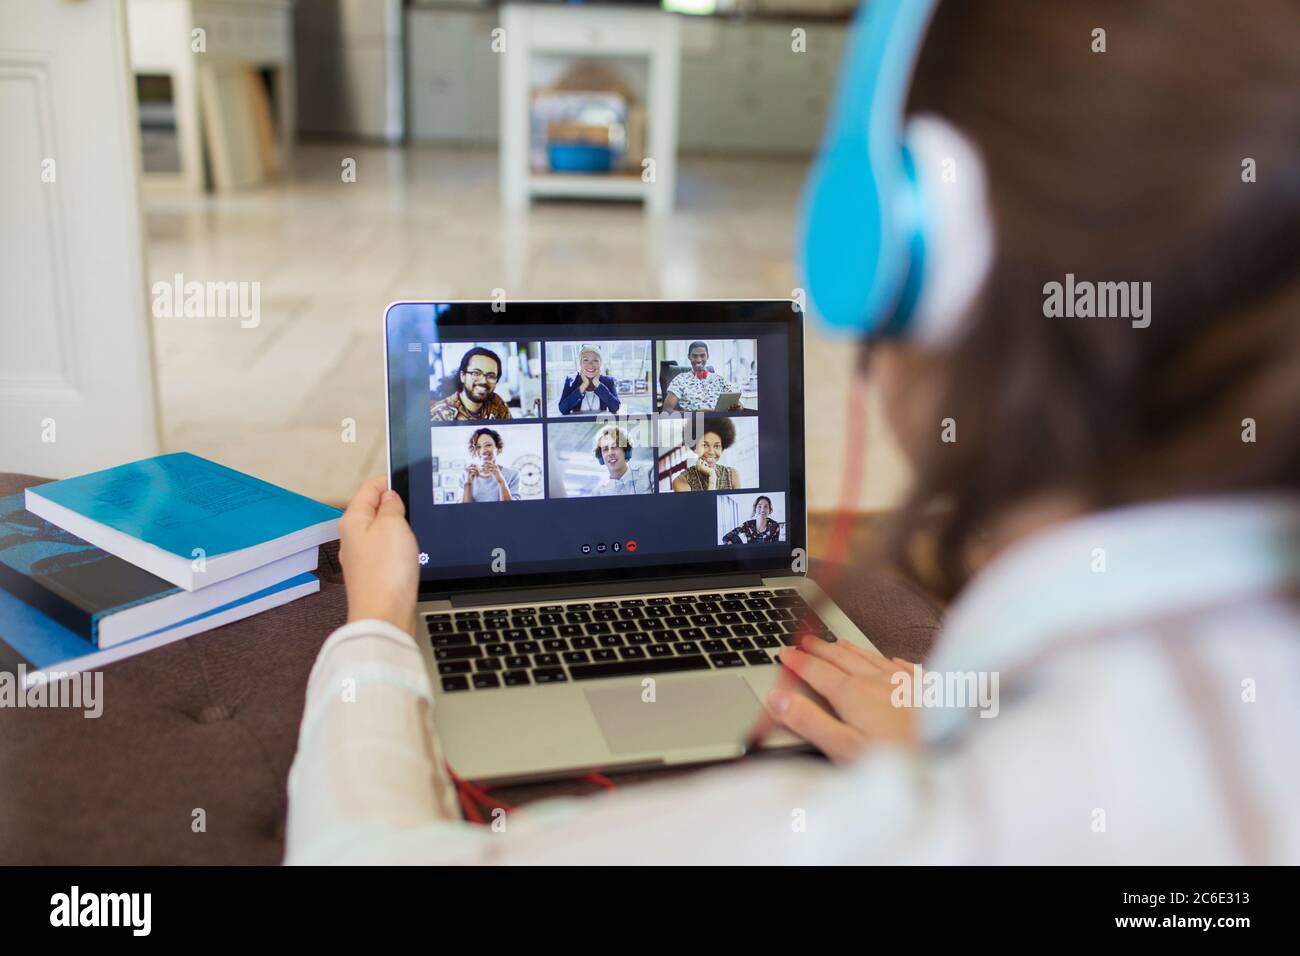 Colleagues video chatting on laptop screen Stock Photo